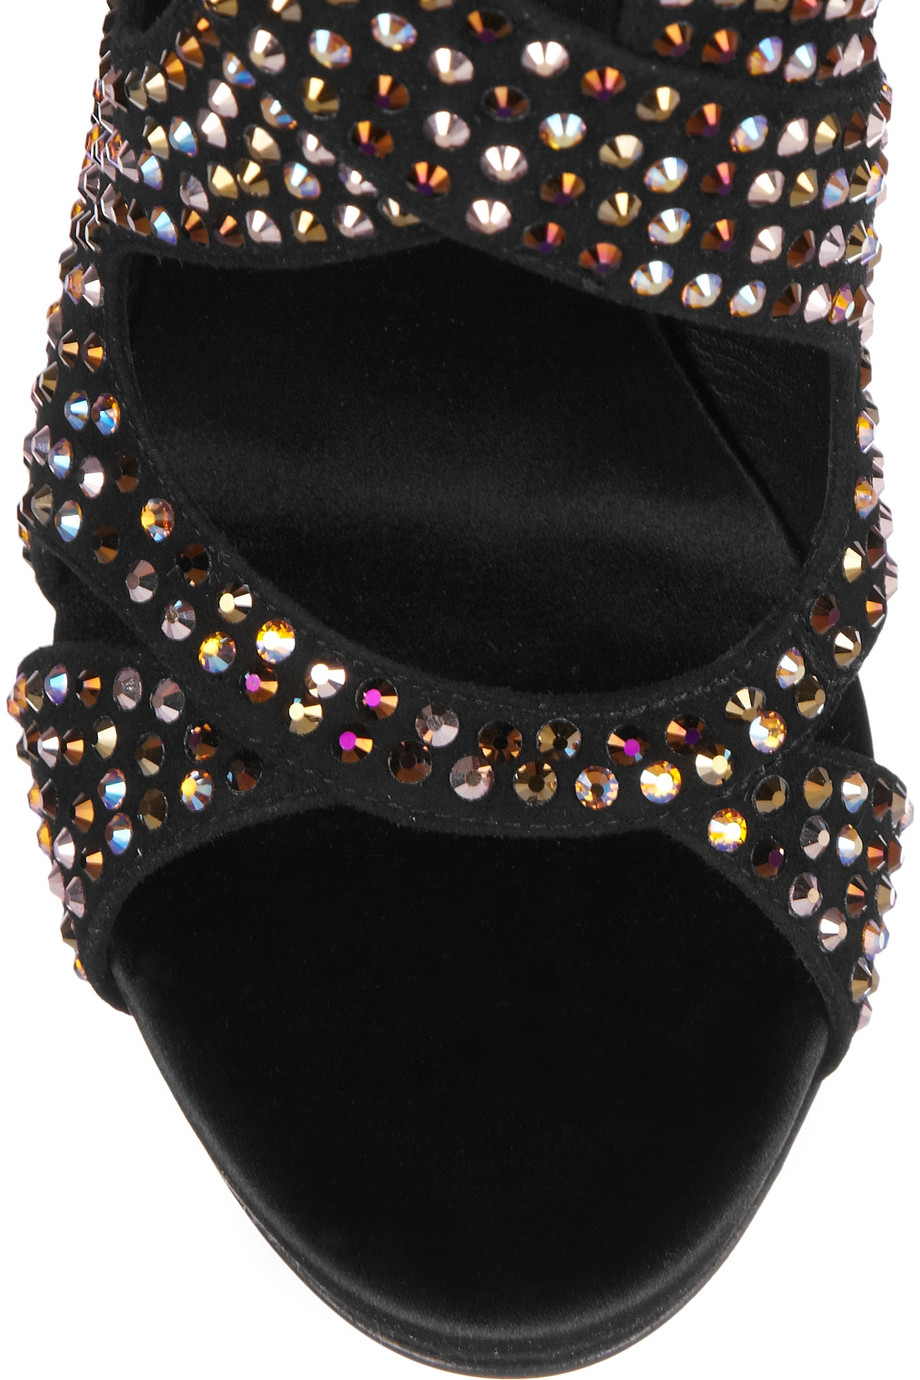 Lyst - Giuseppe Zanotti Crystal Embellished Suede Sandals in Black